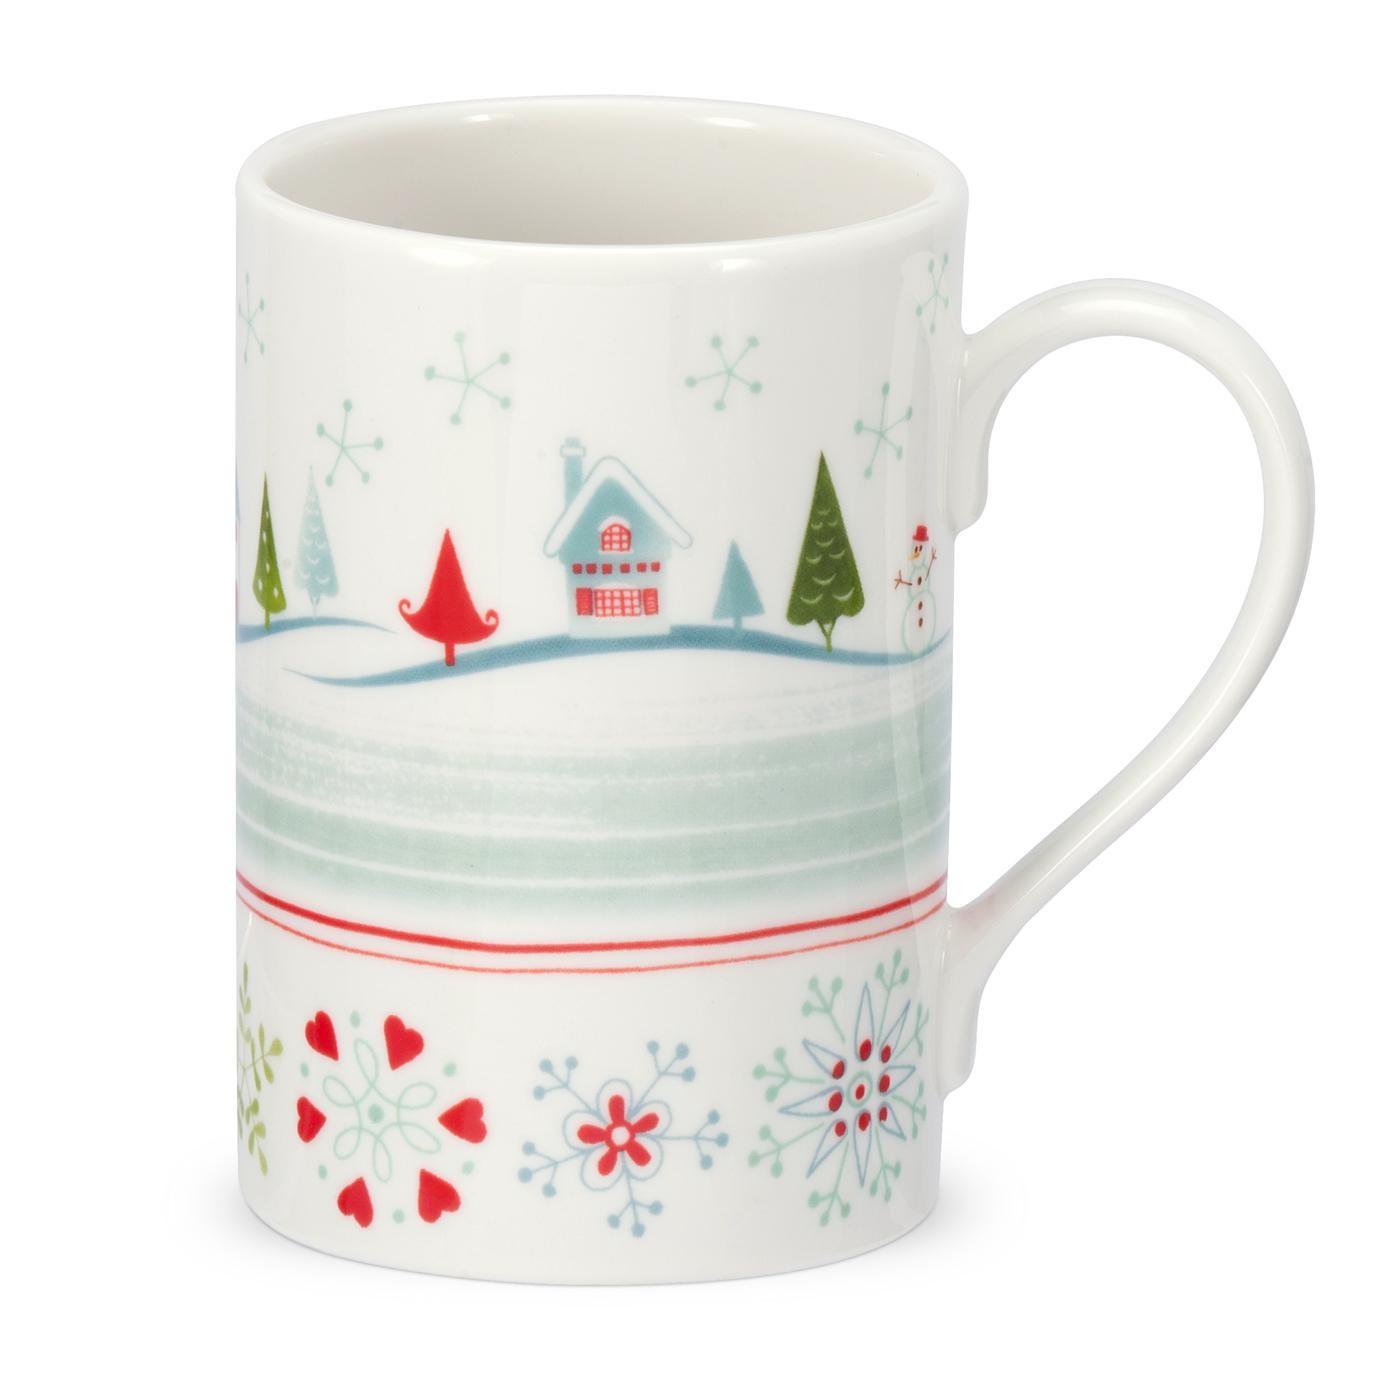 40 Trending Christmas Mugs Should Be on Your Desk - All About Christmas